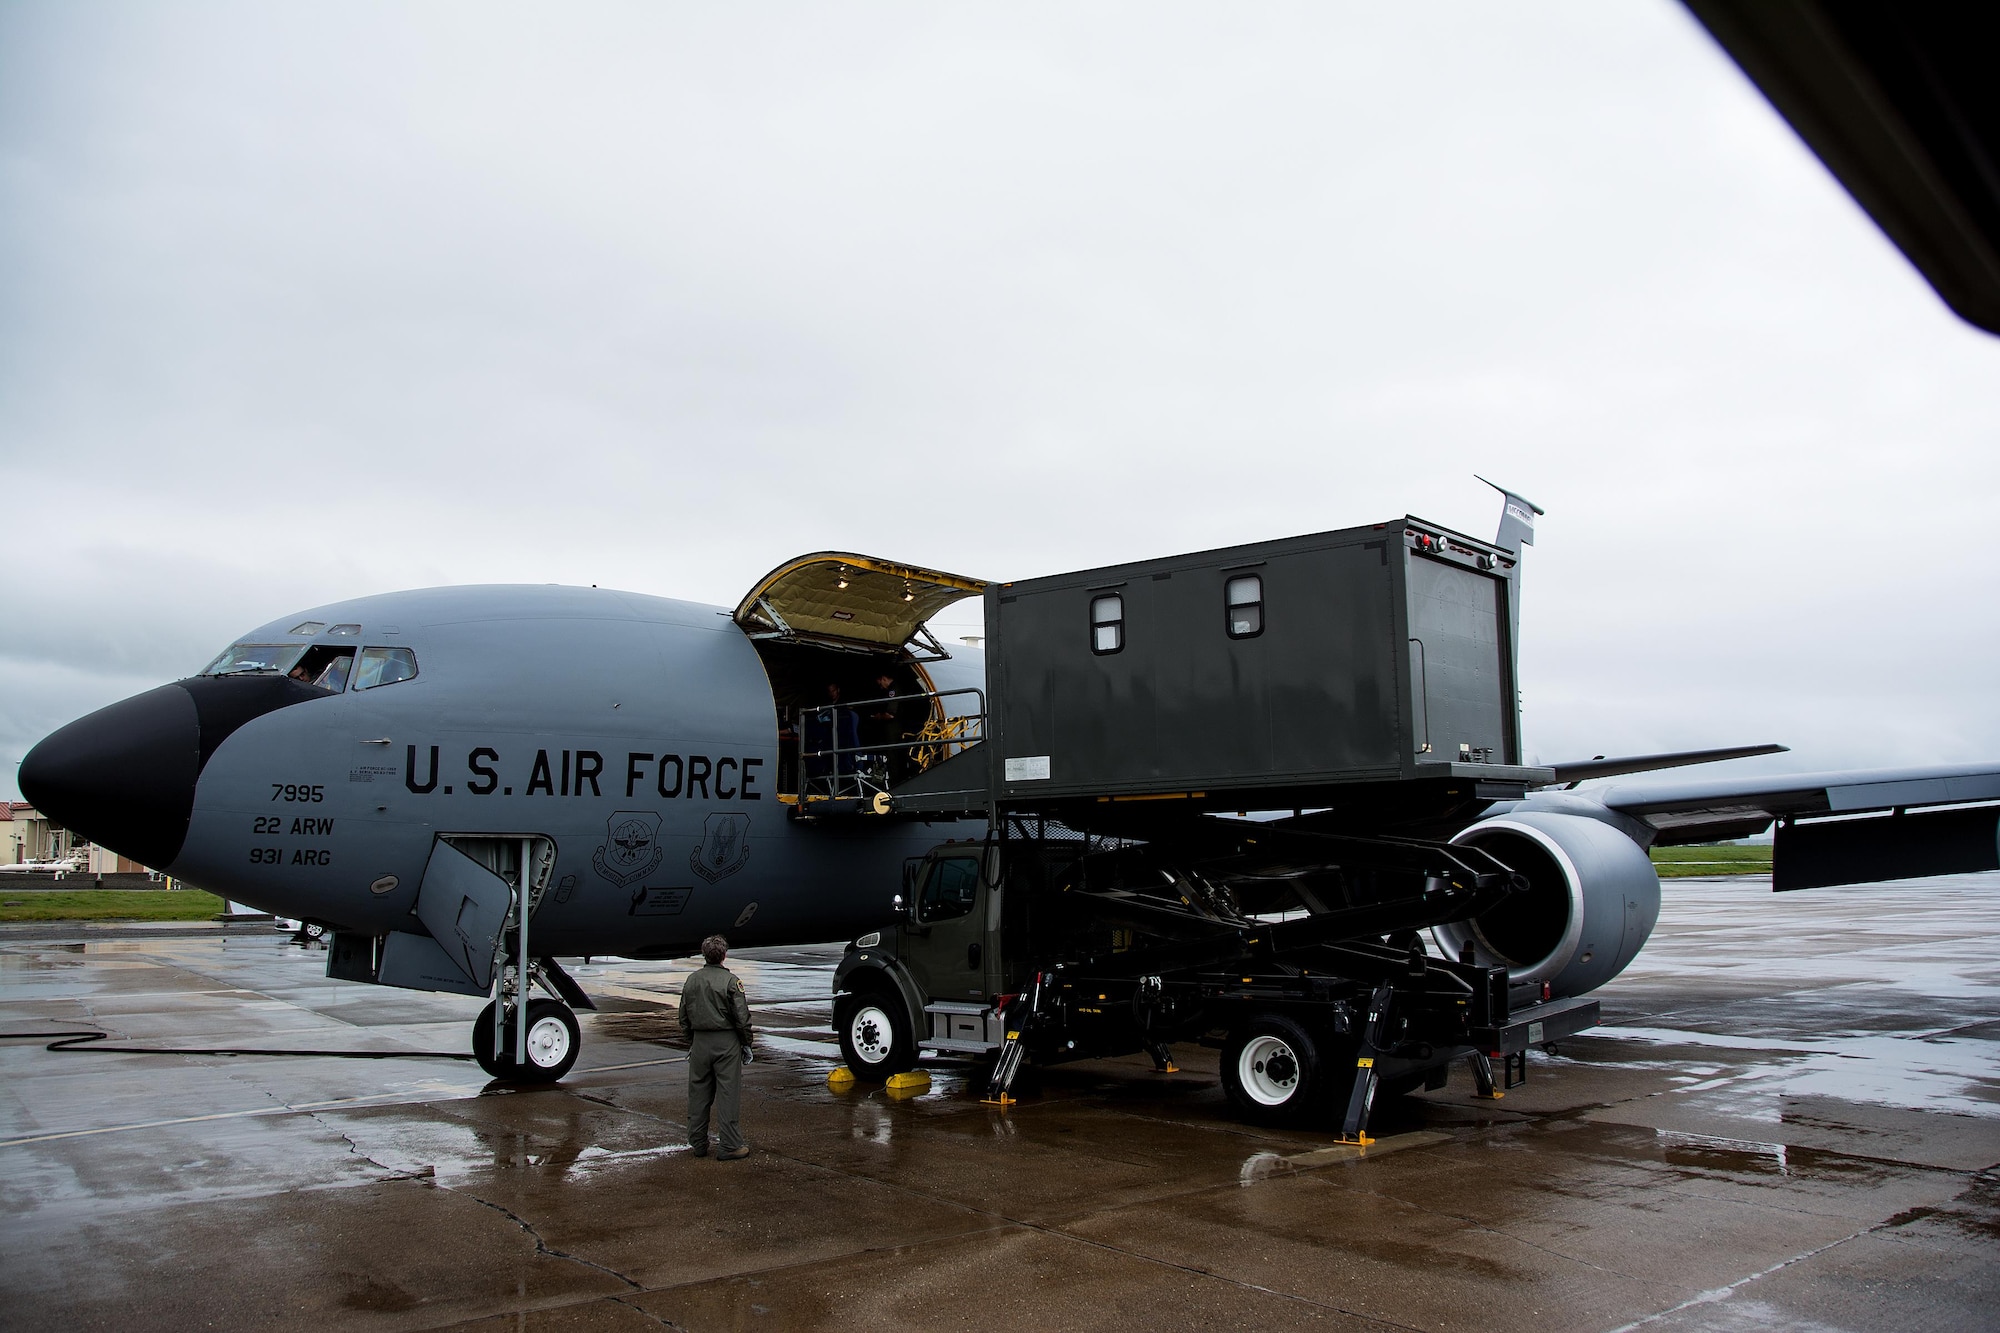 A specialized medical K loader prepares to offload patients from a KC-135 Stratotanker during Patriot Delta at Travis Air Force Base, Calif. on March 24, 2017. Patriot Delta brought in aeromedical evacuations squadrons from the from the 911th Airlift Wing at Pittsburgh Air Reserve Station, Penn., the 908th AW at Maxwell Air Force Base, Miss.; the 932d Airlift Wing at Scott AFB, Ill.; and the 349th Air Mobility Wing at Travis AFB. (U.S. Air Force photo by Staff Sgt. Daniel Phelps)